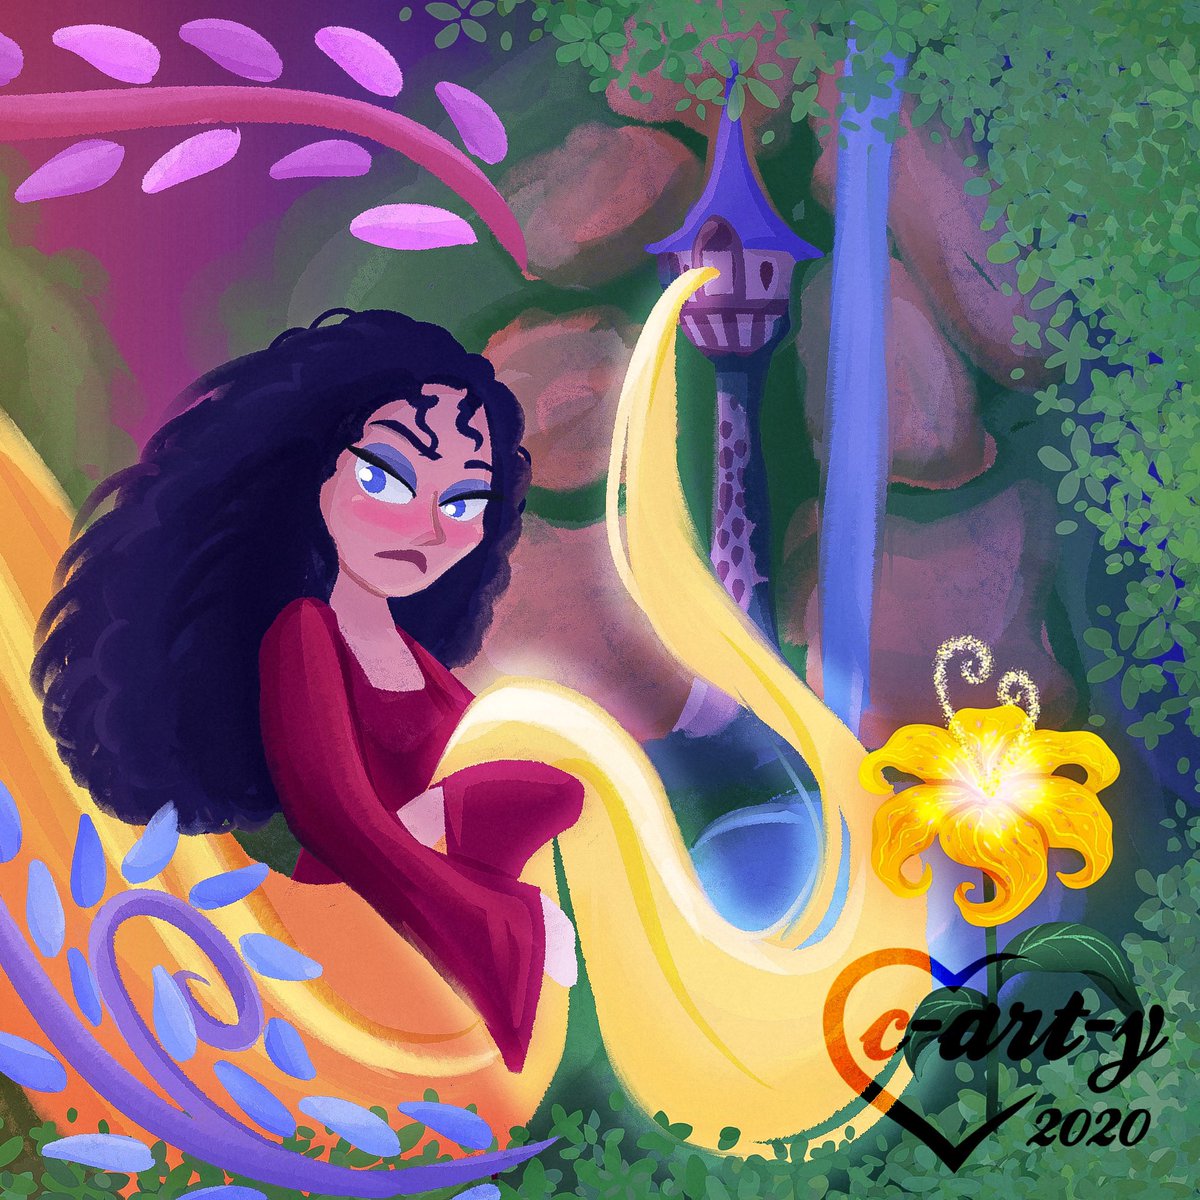 TANGLED 10TH ANNIVERSARY 👑✨🌸🎨🧁🌼
0️⃣2️⃣
1/3
Don’t really like the result but the intent was to mimic rapunzels art style so
#tangled #disney #rapunzel #tangledanniversary #disneyfanart #fanart #tangled10 #mothergothel #disneyvillain